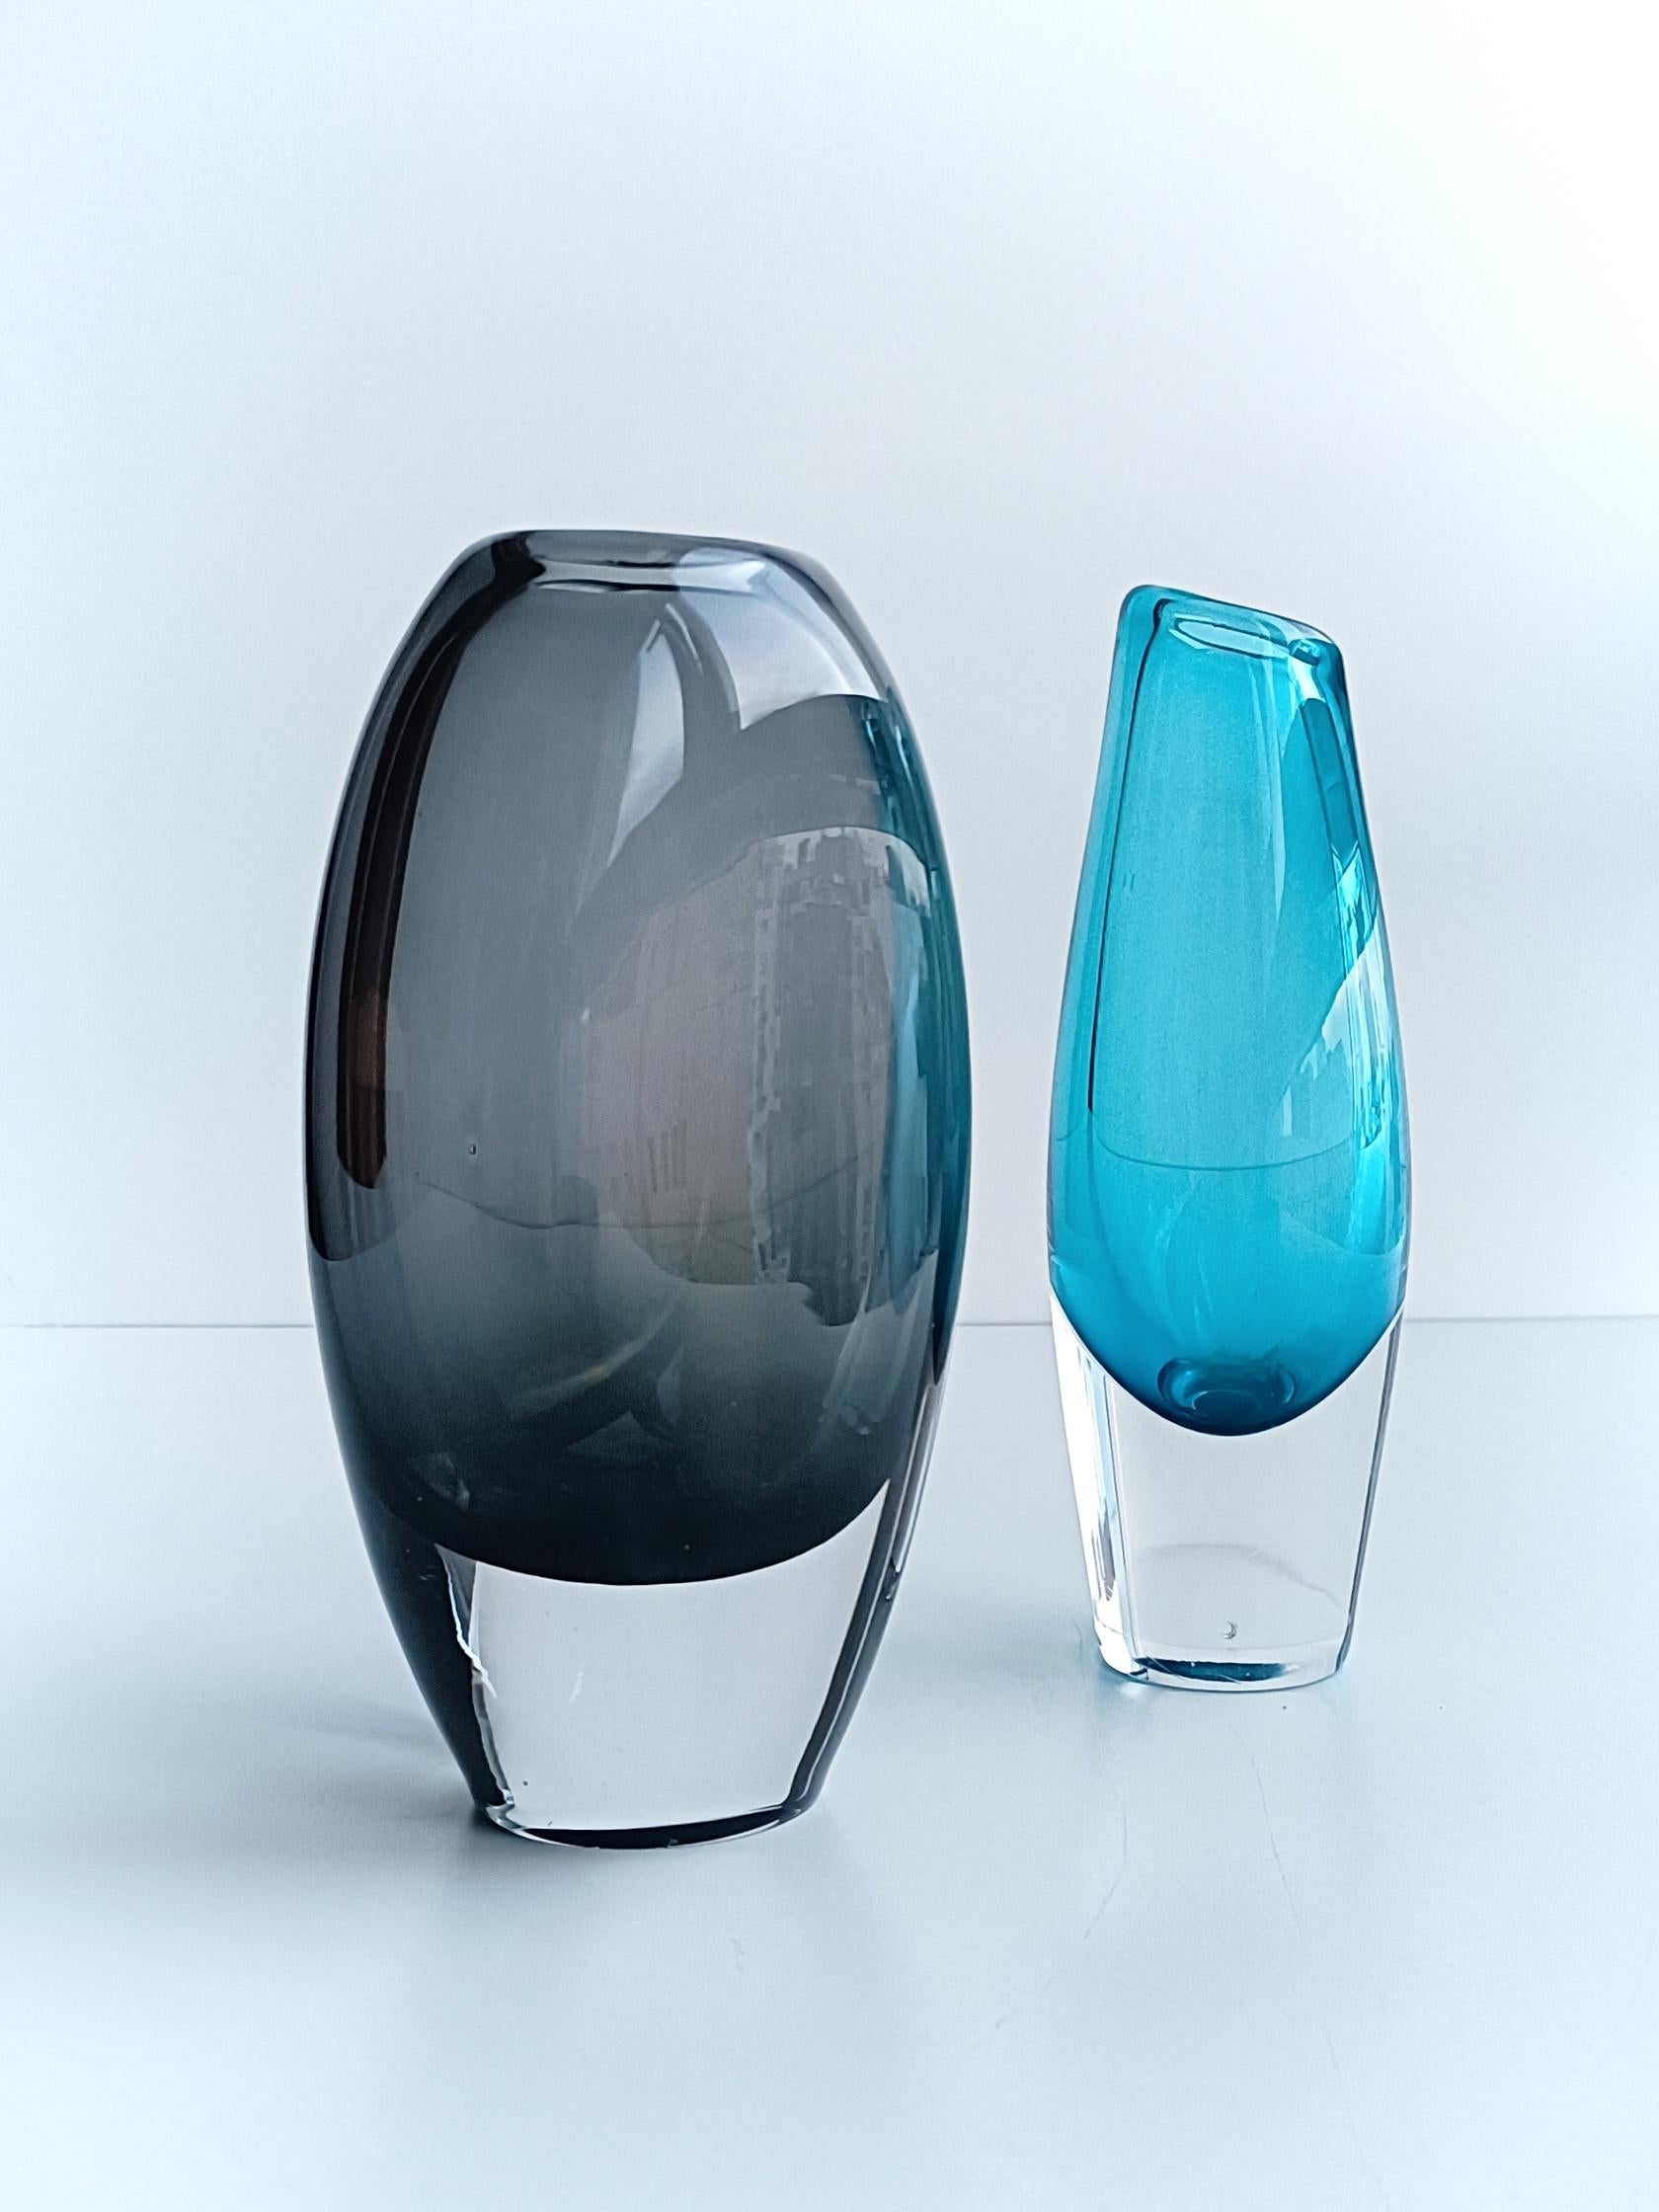 Mid-Century Modern minimalist Scandinavian glass pair of vases by Sven Palmqvist for Orrefors  - hand produced in Sweden, circa the 1950s. 

They are stunning in the hand. Absolutely gorgeous to decorate the top of a sideboard, a chest of drawers or